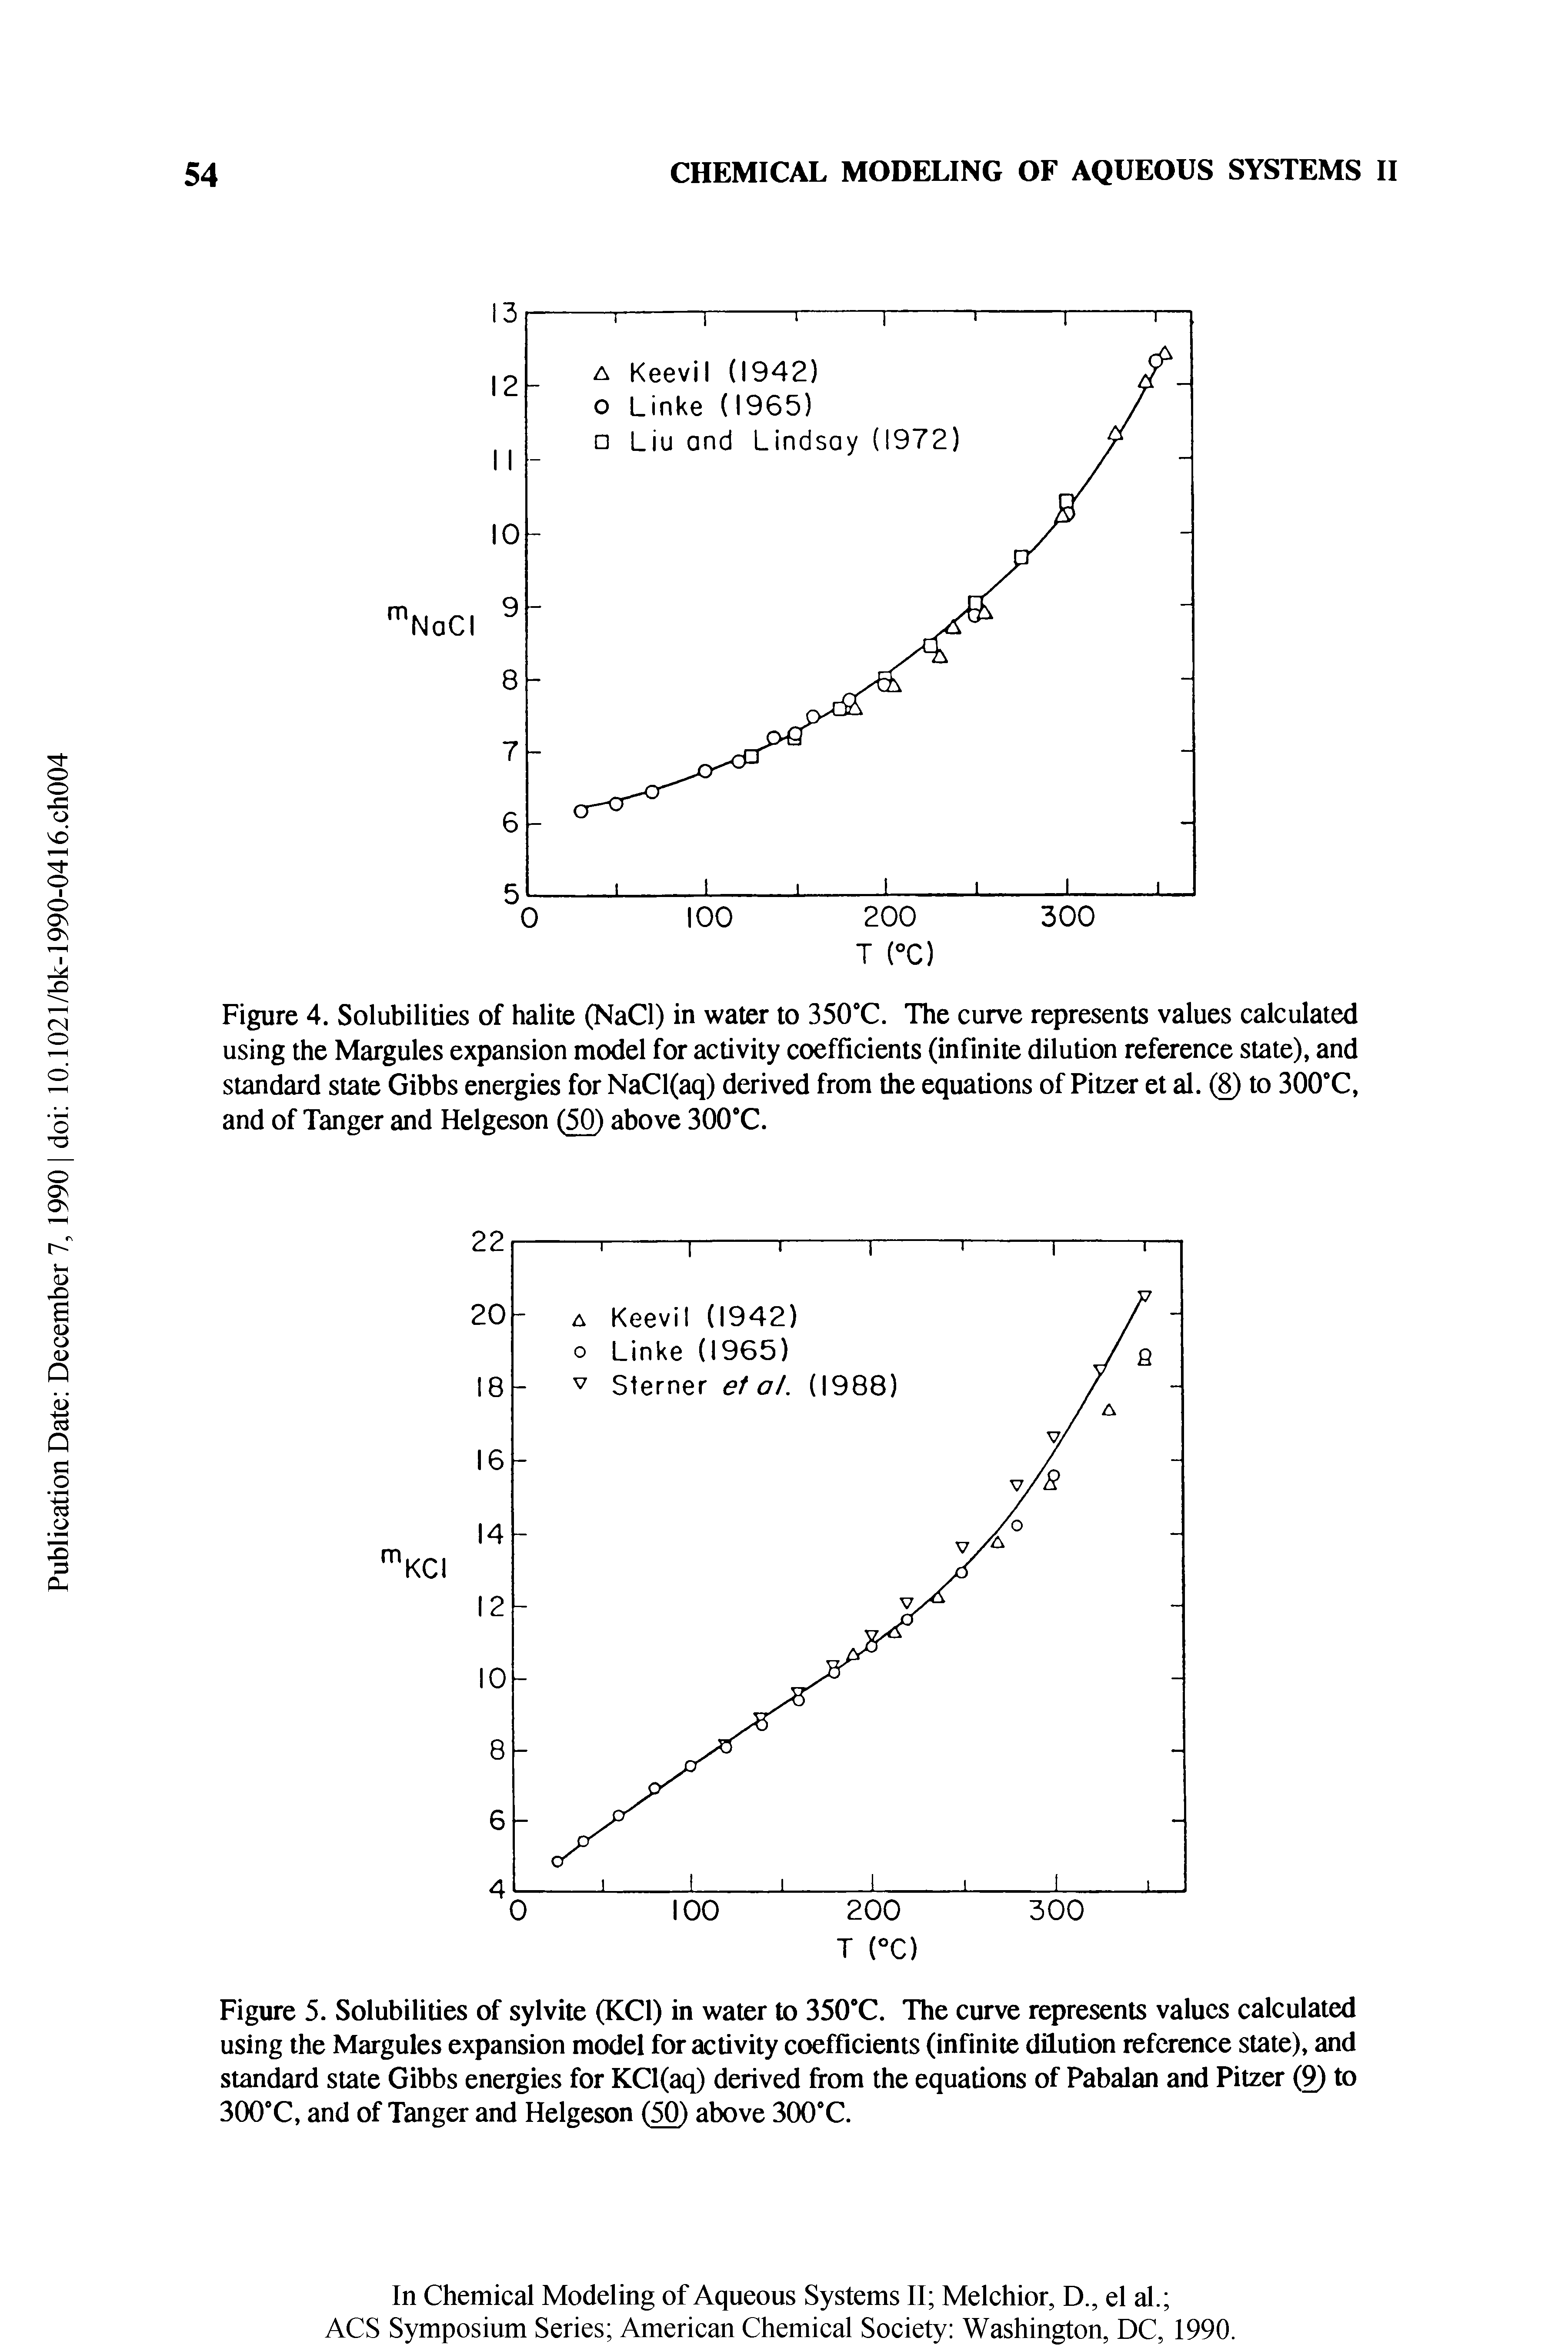 Figure 4. Solubilities of halite (NaCl) in water to 350°C. The curve represents values calculated using the Margules expansion model for activity coefficients (infinite dilution reference state), and standard state Gibbs energies for NaCl(aq) derived from the equations of Pitzer et al. to 300°C, and of Tanger and Helgeson above 300 C.